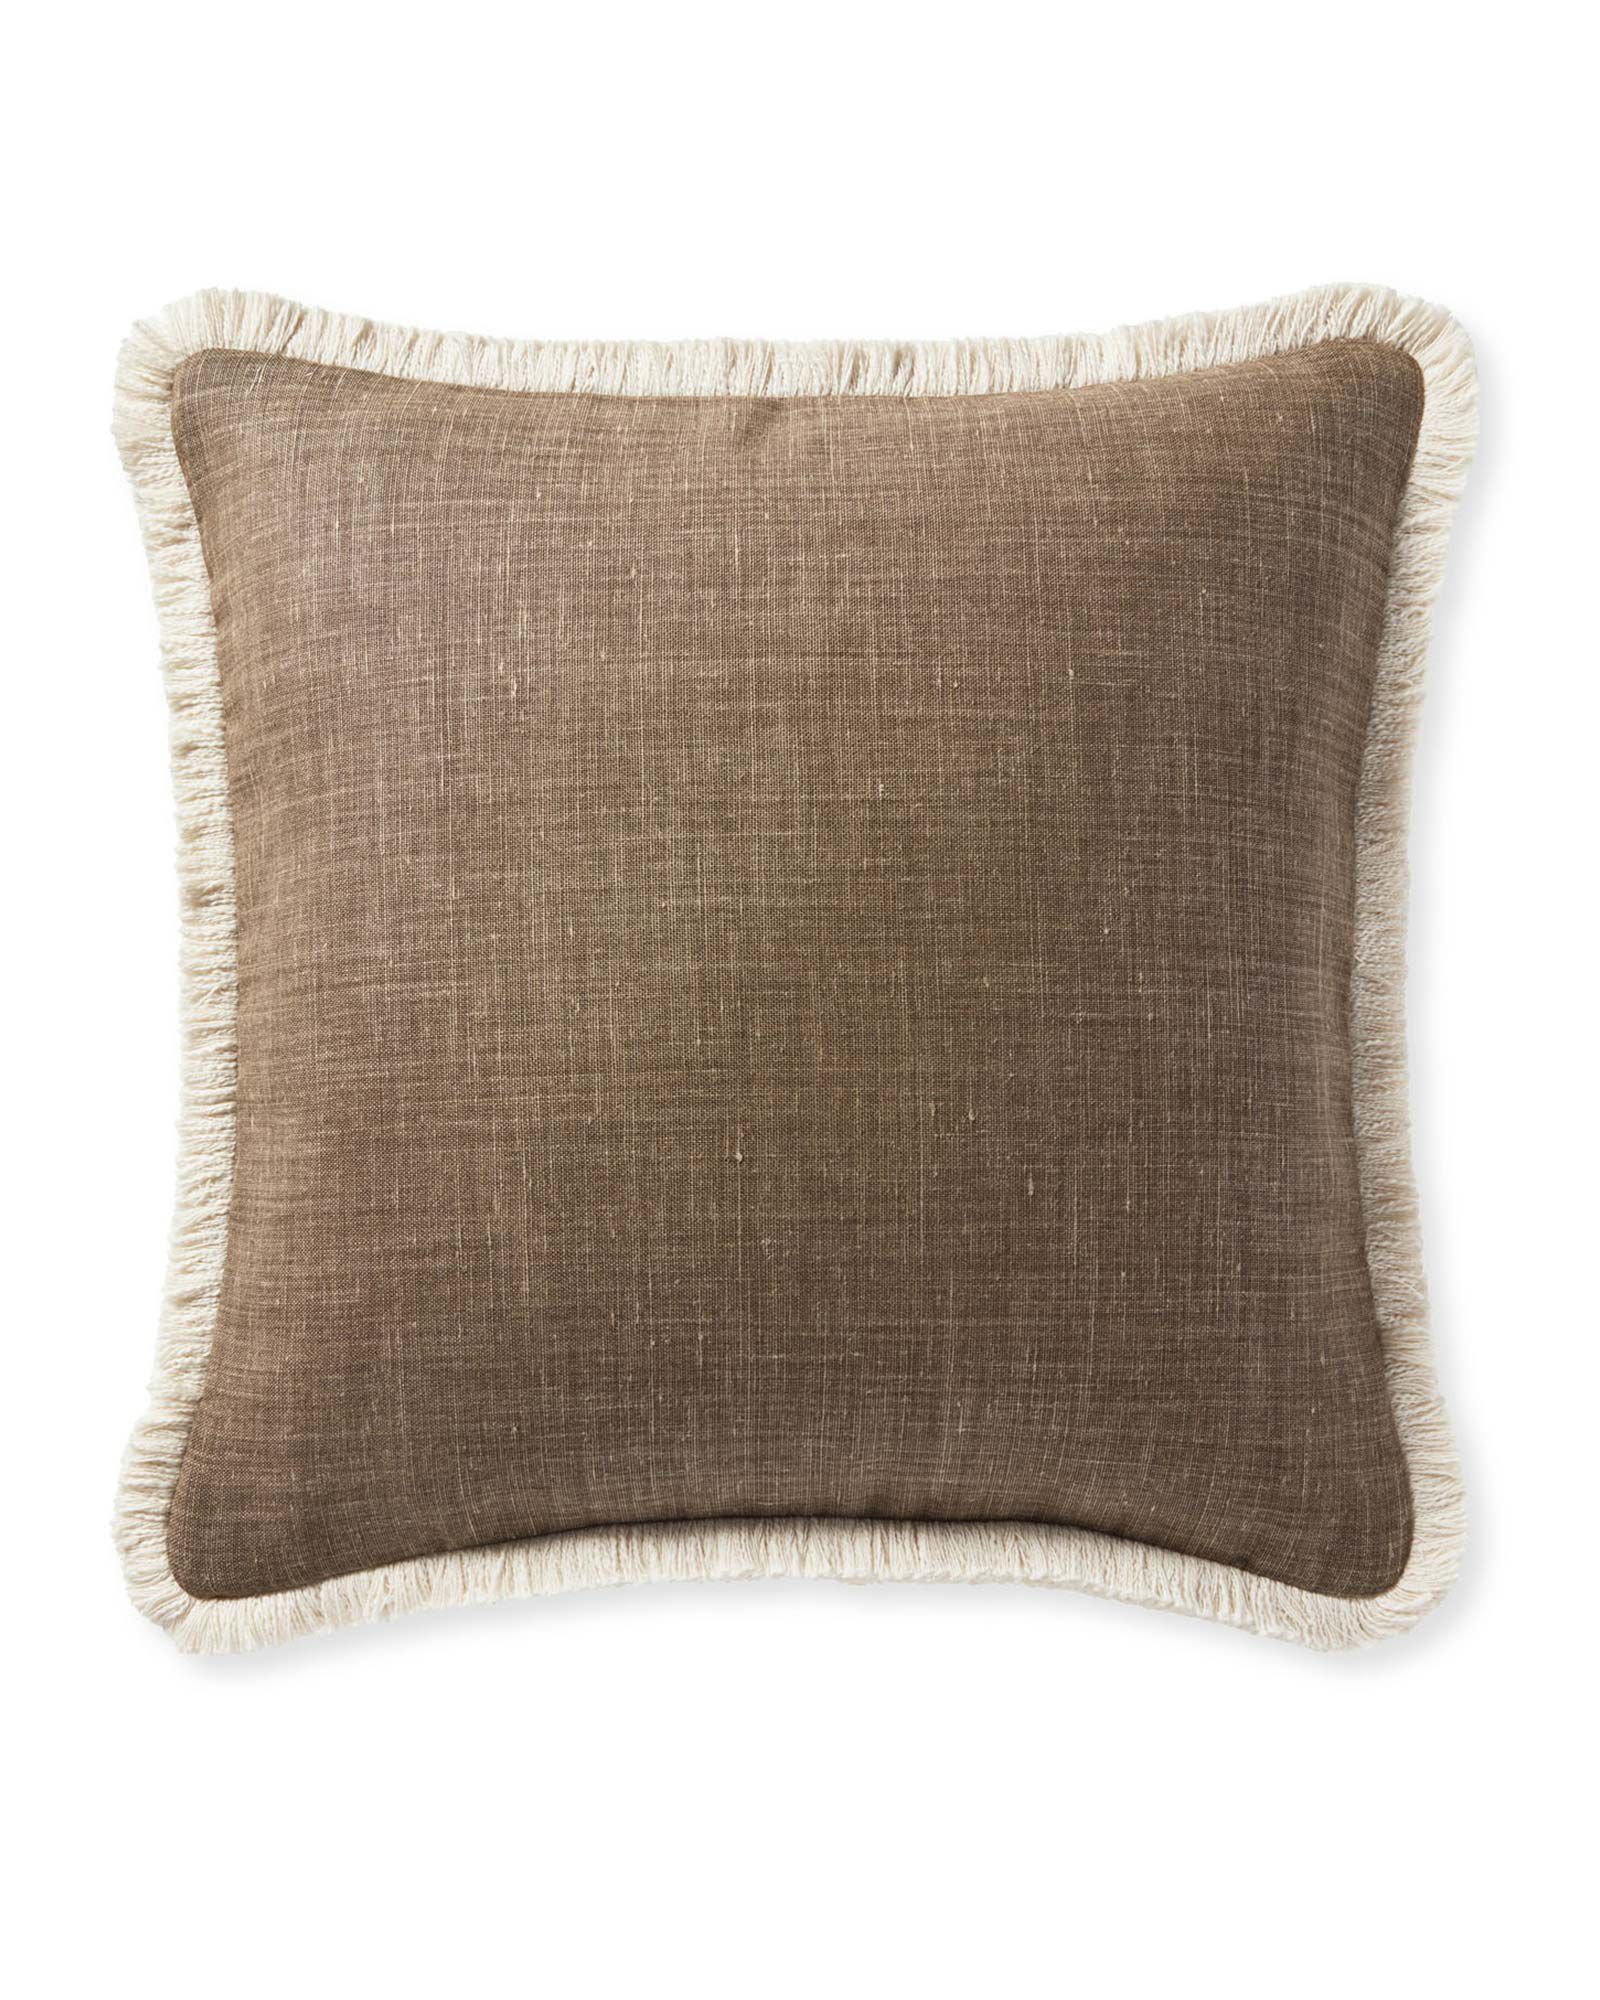 Bowden Pillow Cover | Serena and Lily